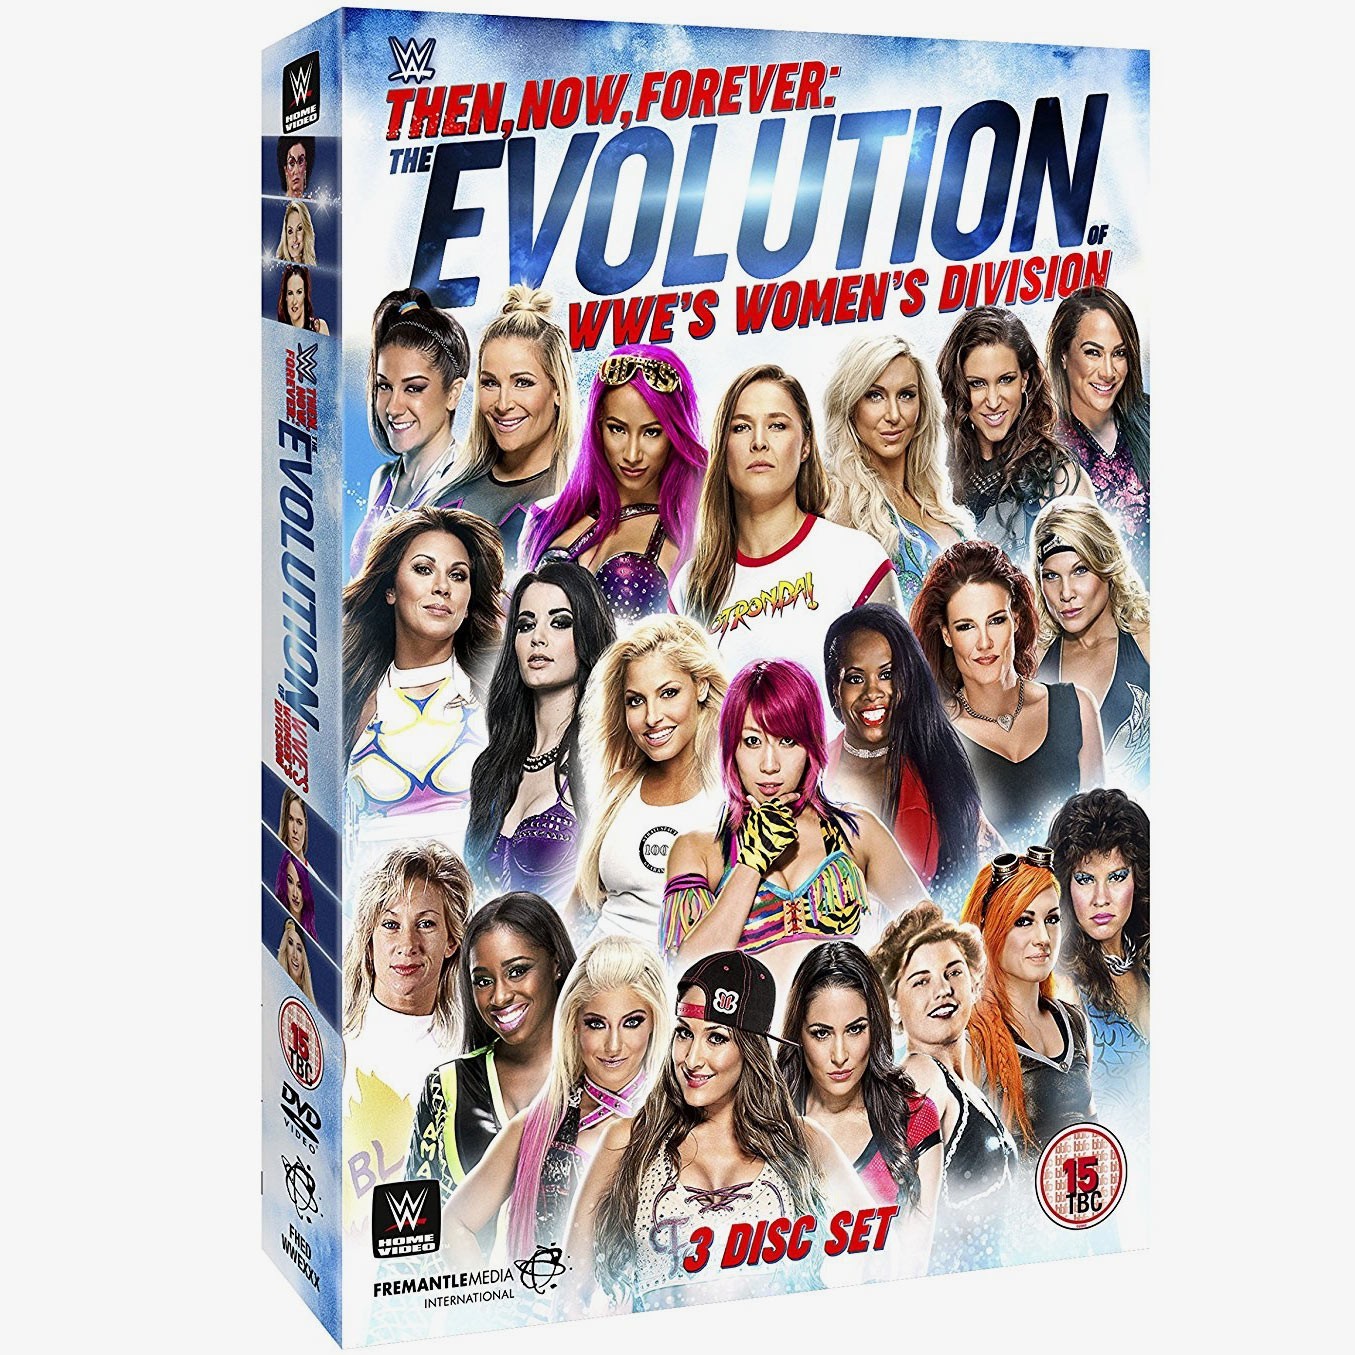 WWE Then Now Forever: The Evolution of WWE's Women's Division DVD